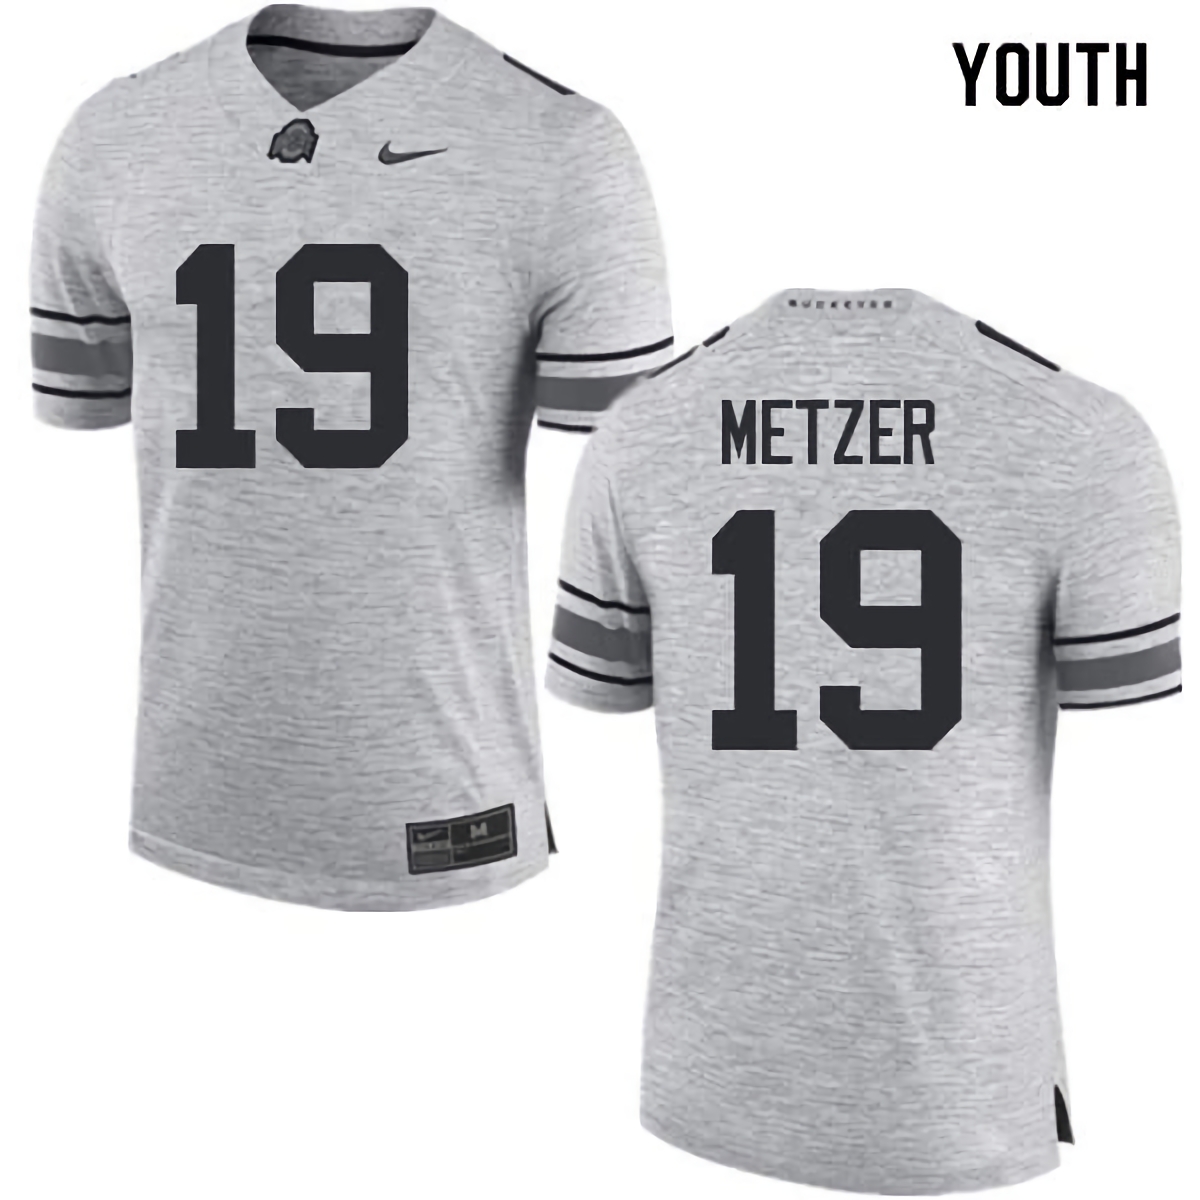 Jake Metzer Ohio State Buckeyes Youth NCAA #19 Nike Gray College Stitched Football Jersey QSL0456PJ